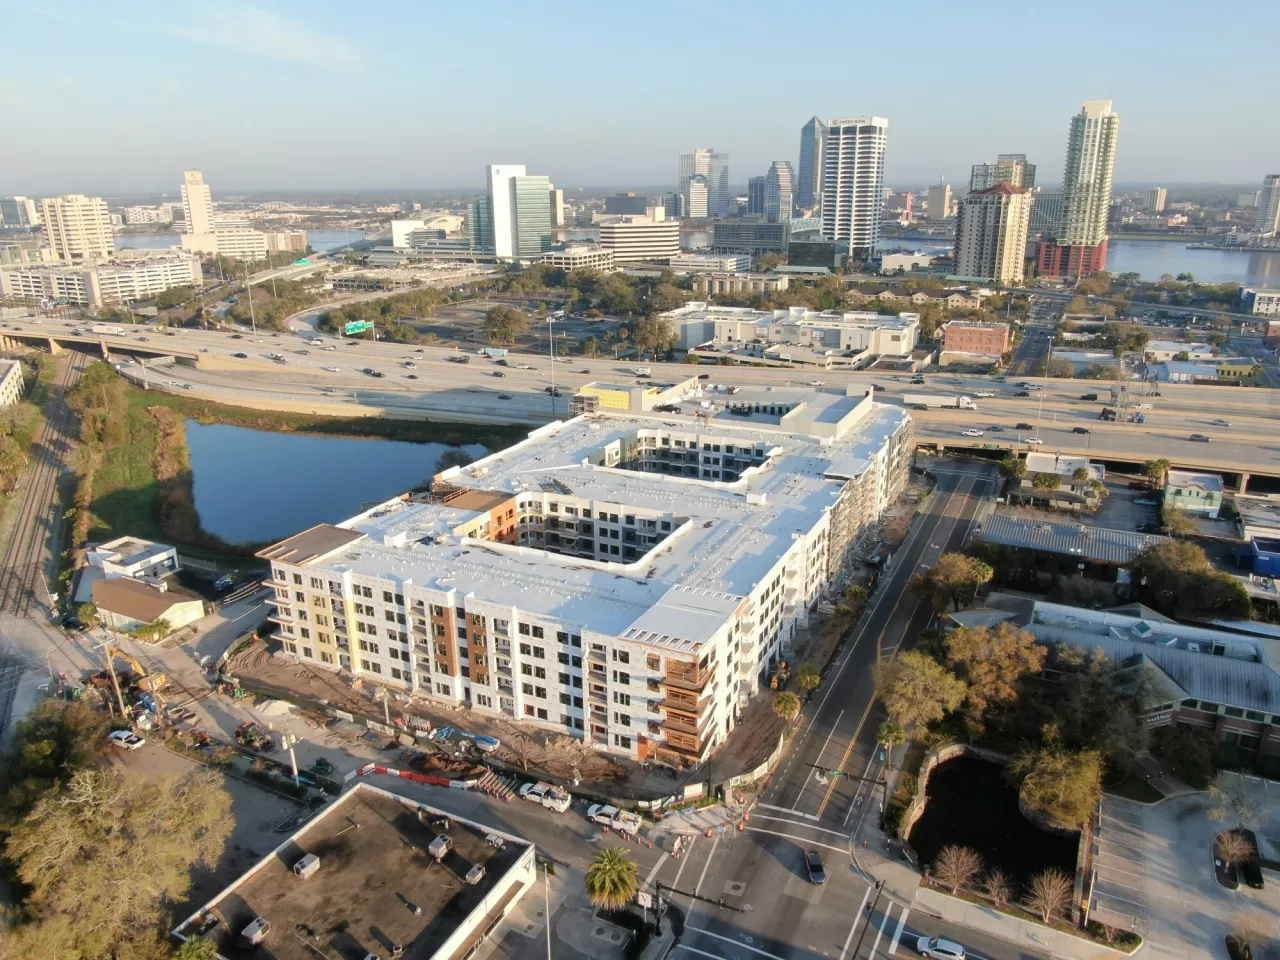 The Station at San Marco project is a 345-unit multifamily apartment community located on a 3.43-acre site just south of downtown across the St. Johns River in Jacksonville, Florida. The developer is Block One Ventures and the architect is Dynamik Design. img#1